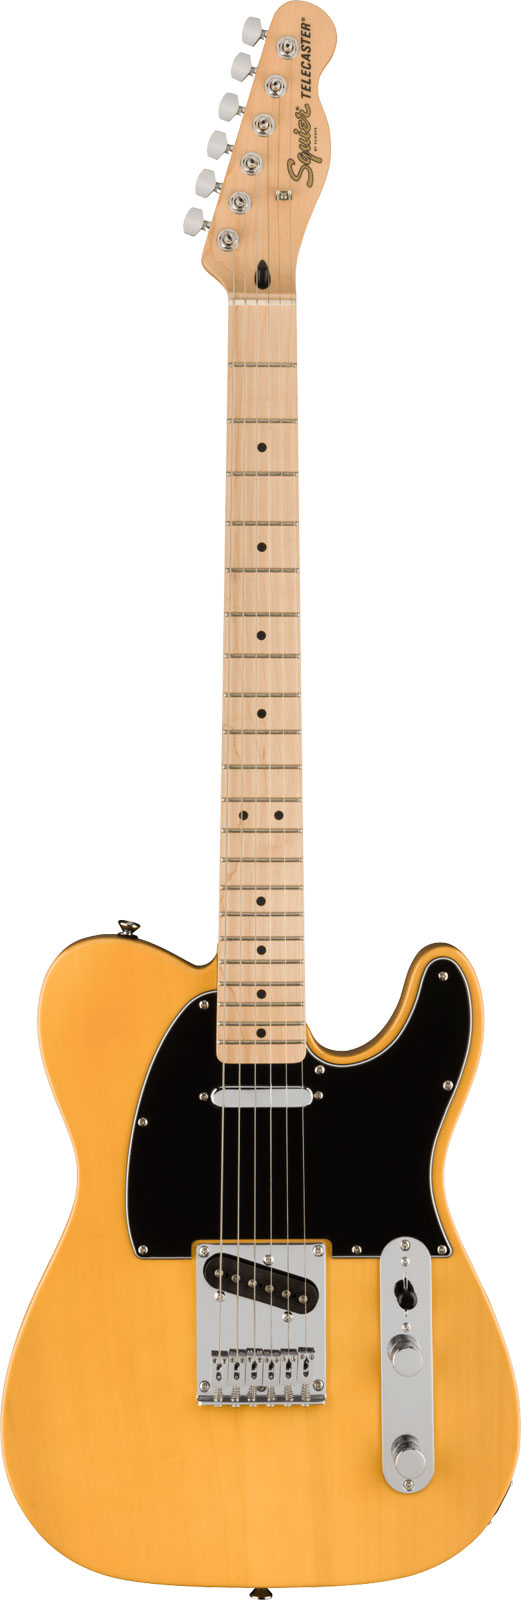 SQUIER BY FENDER AFFINITY TELECASTER MN BUTTERSCOTCH BLONDE